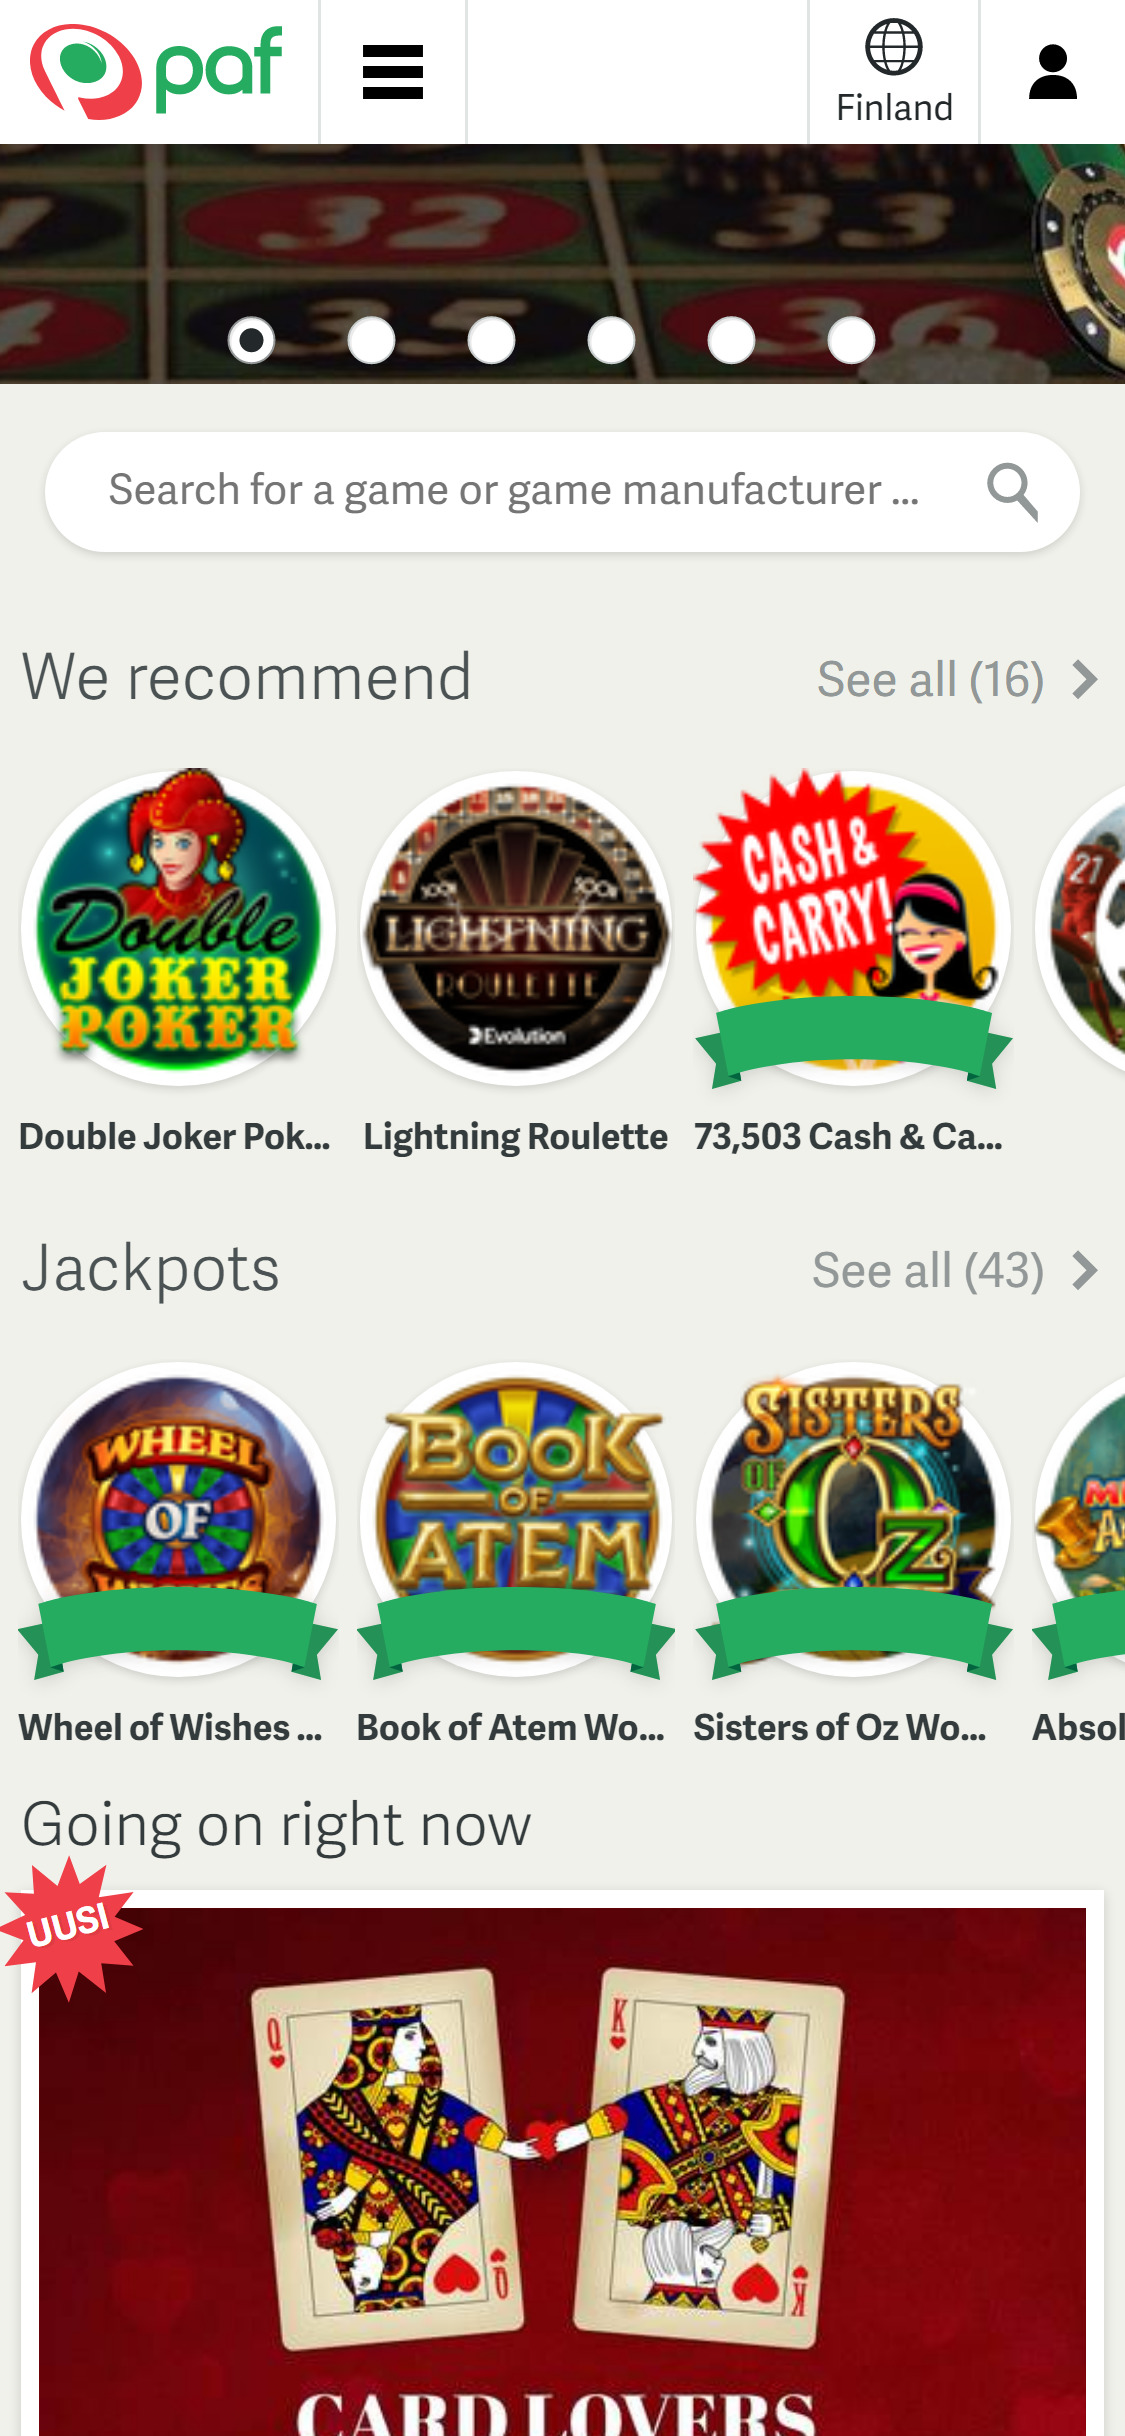 Paf Casino Mobile Games Review